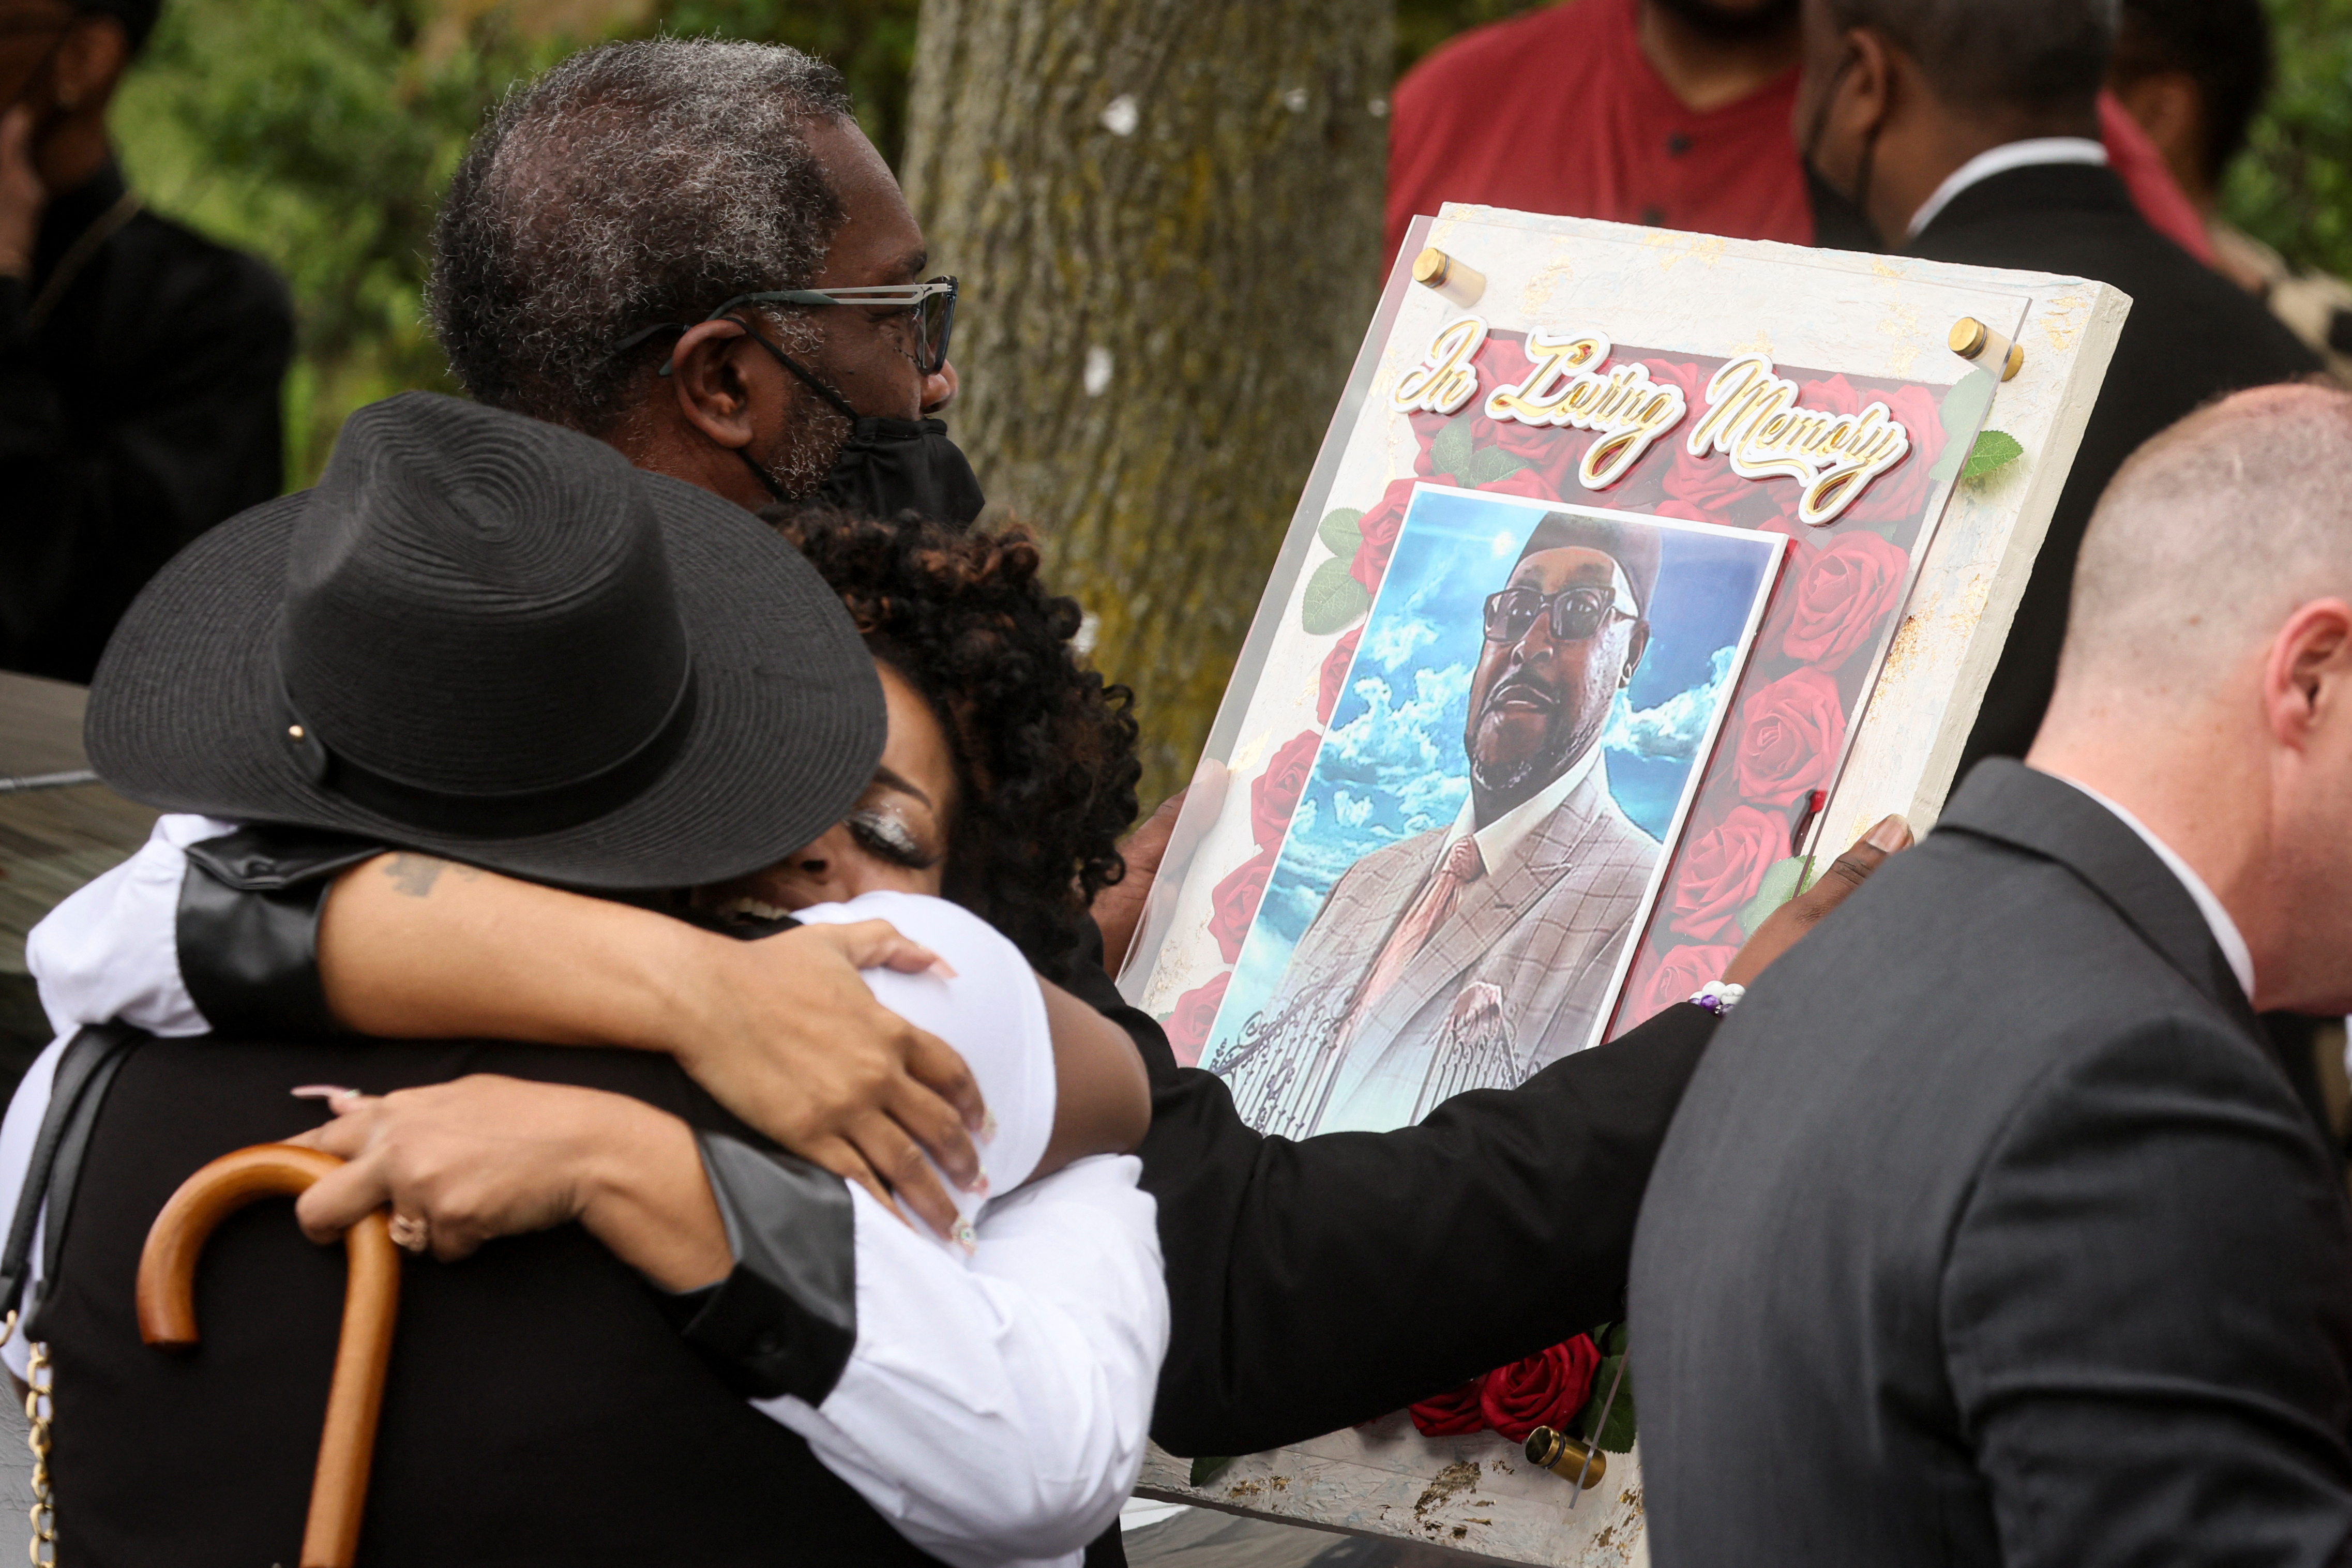 Mourners exit the funeral of Heyward Patterson in the wake of a weekend shooting at a Tops supermarket in Buffalo, New York